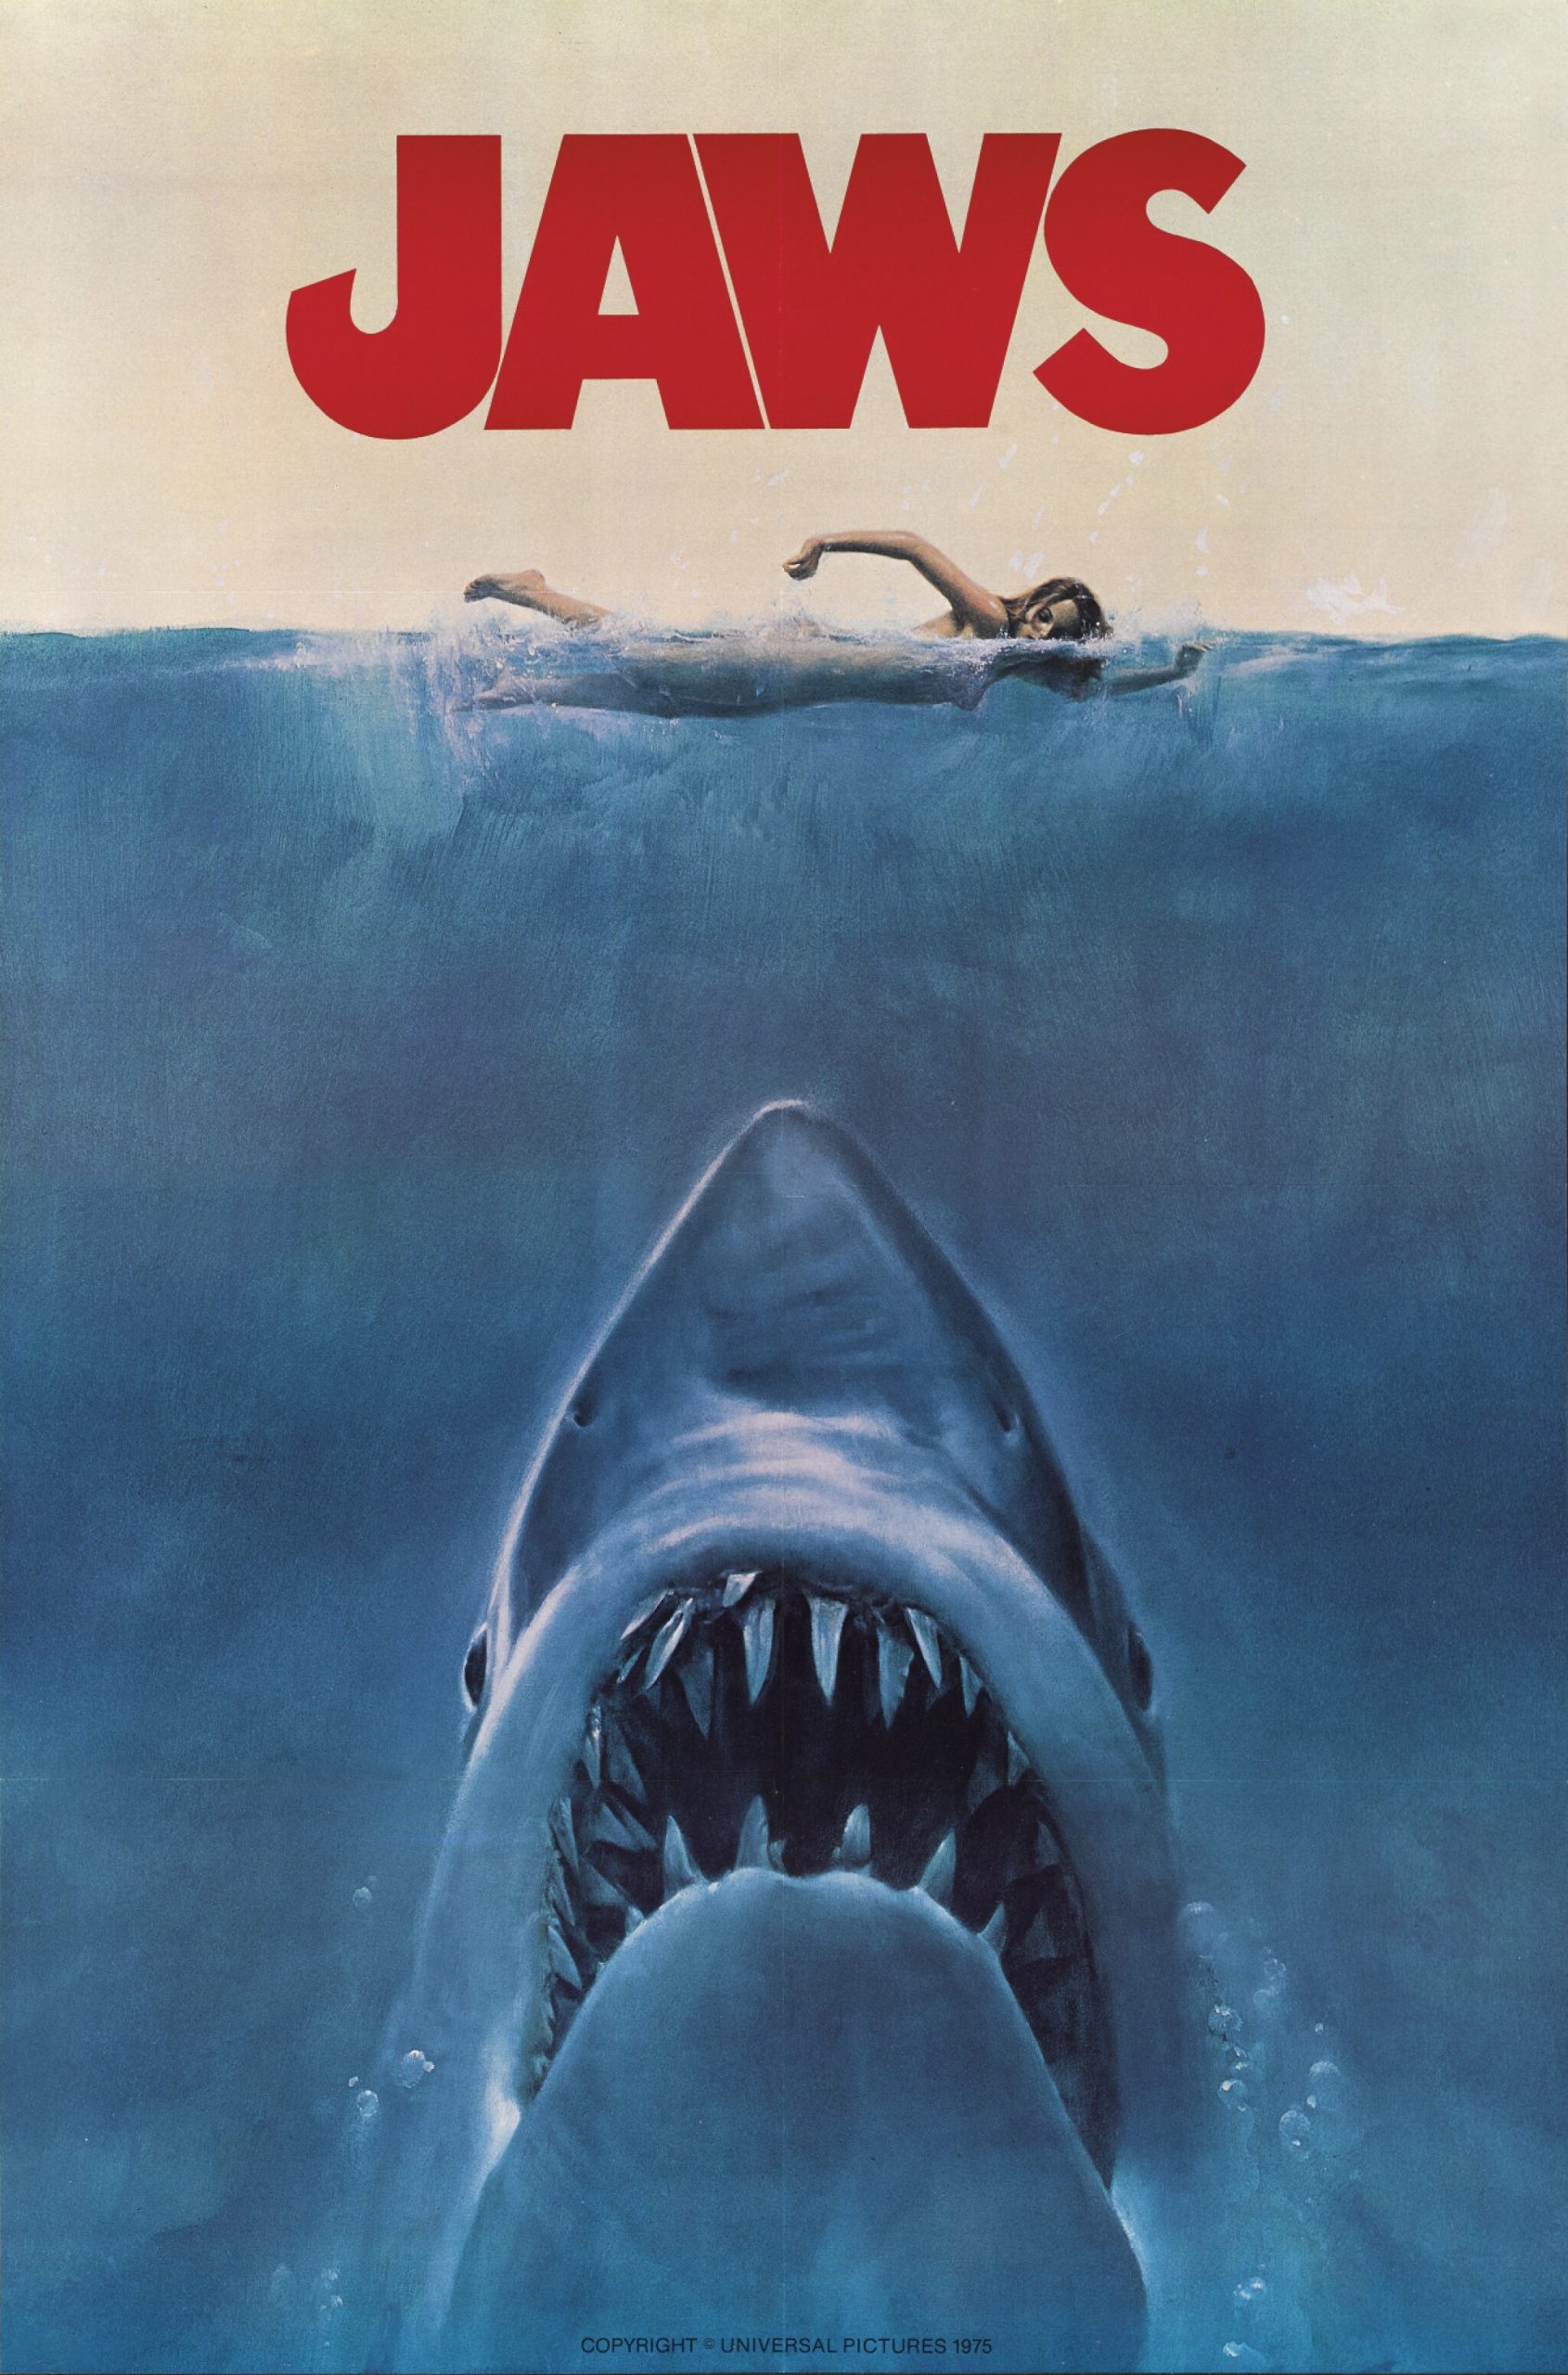 A film poster featuring a giant shark about to attack a swimming woman.